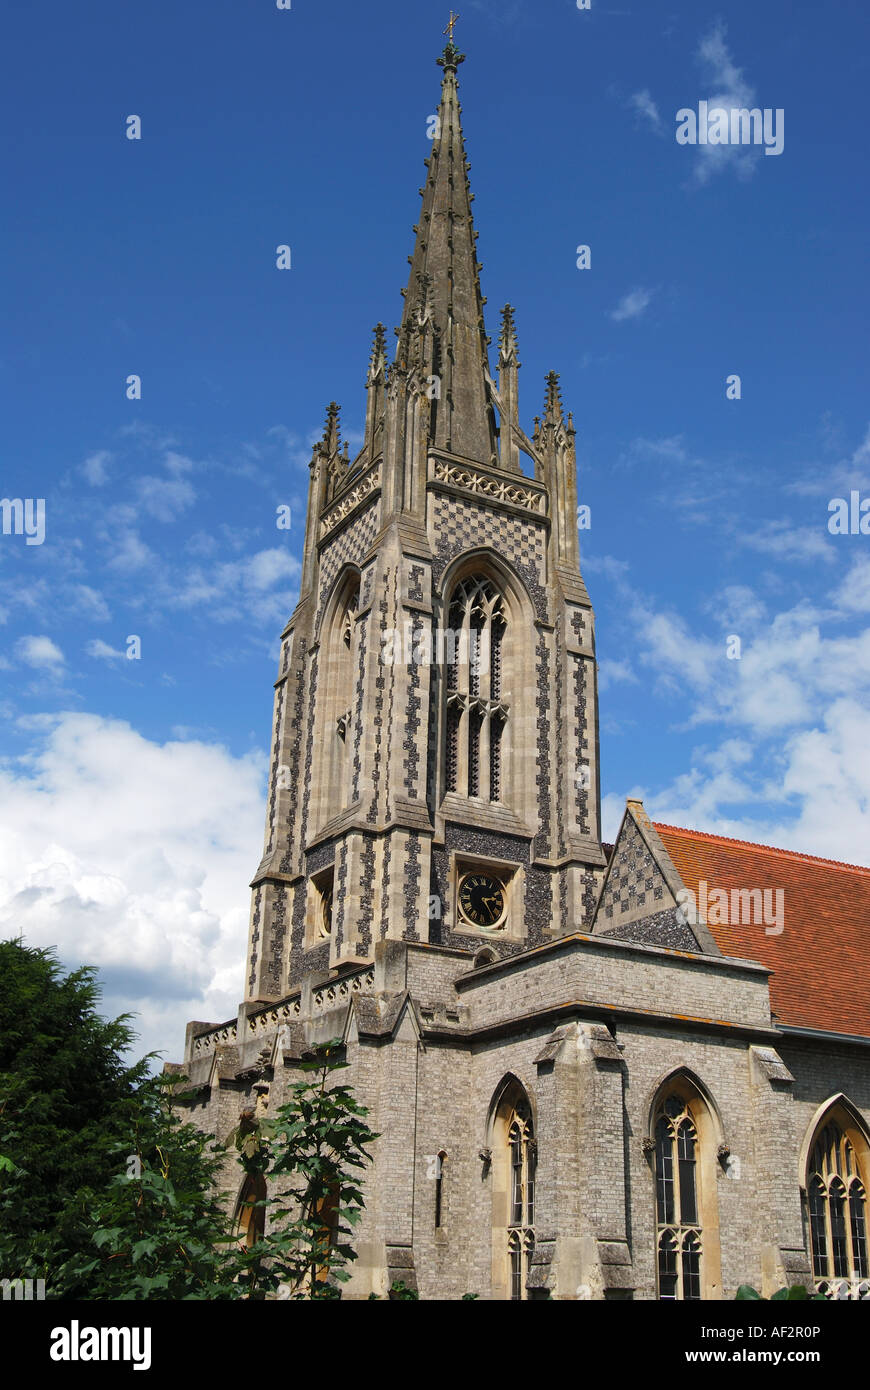 All Saints Church, Marlow, Buckinghamshire, Angleterre, Royaume-Uni Banque D'Images